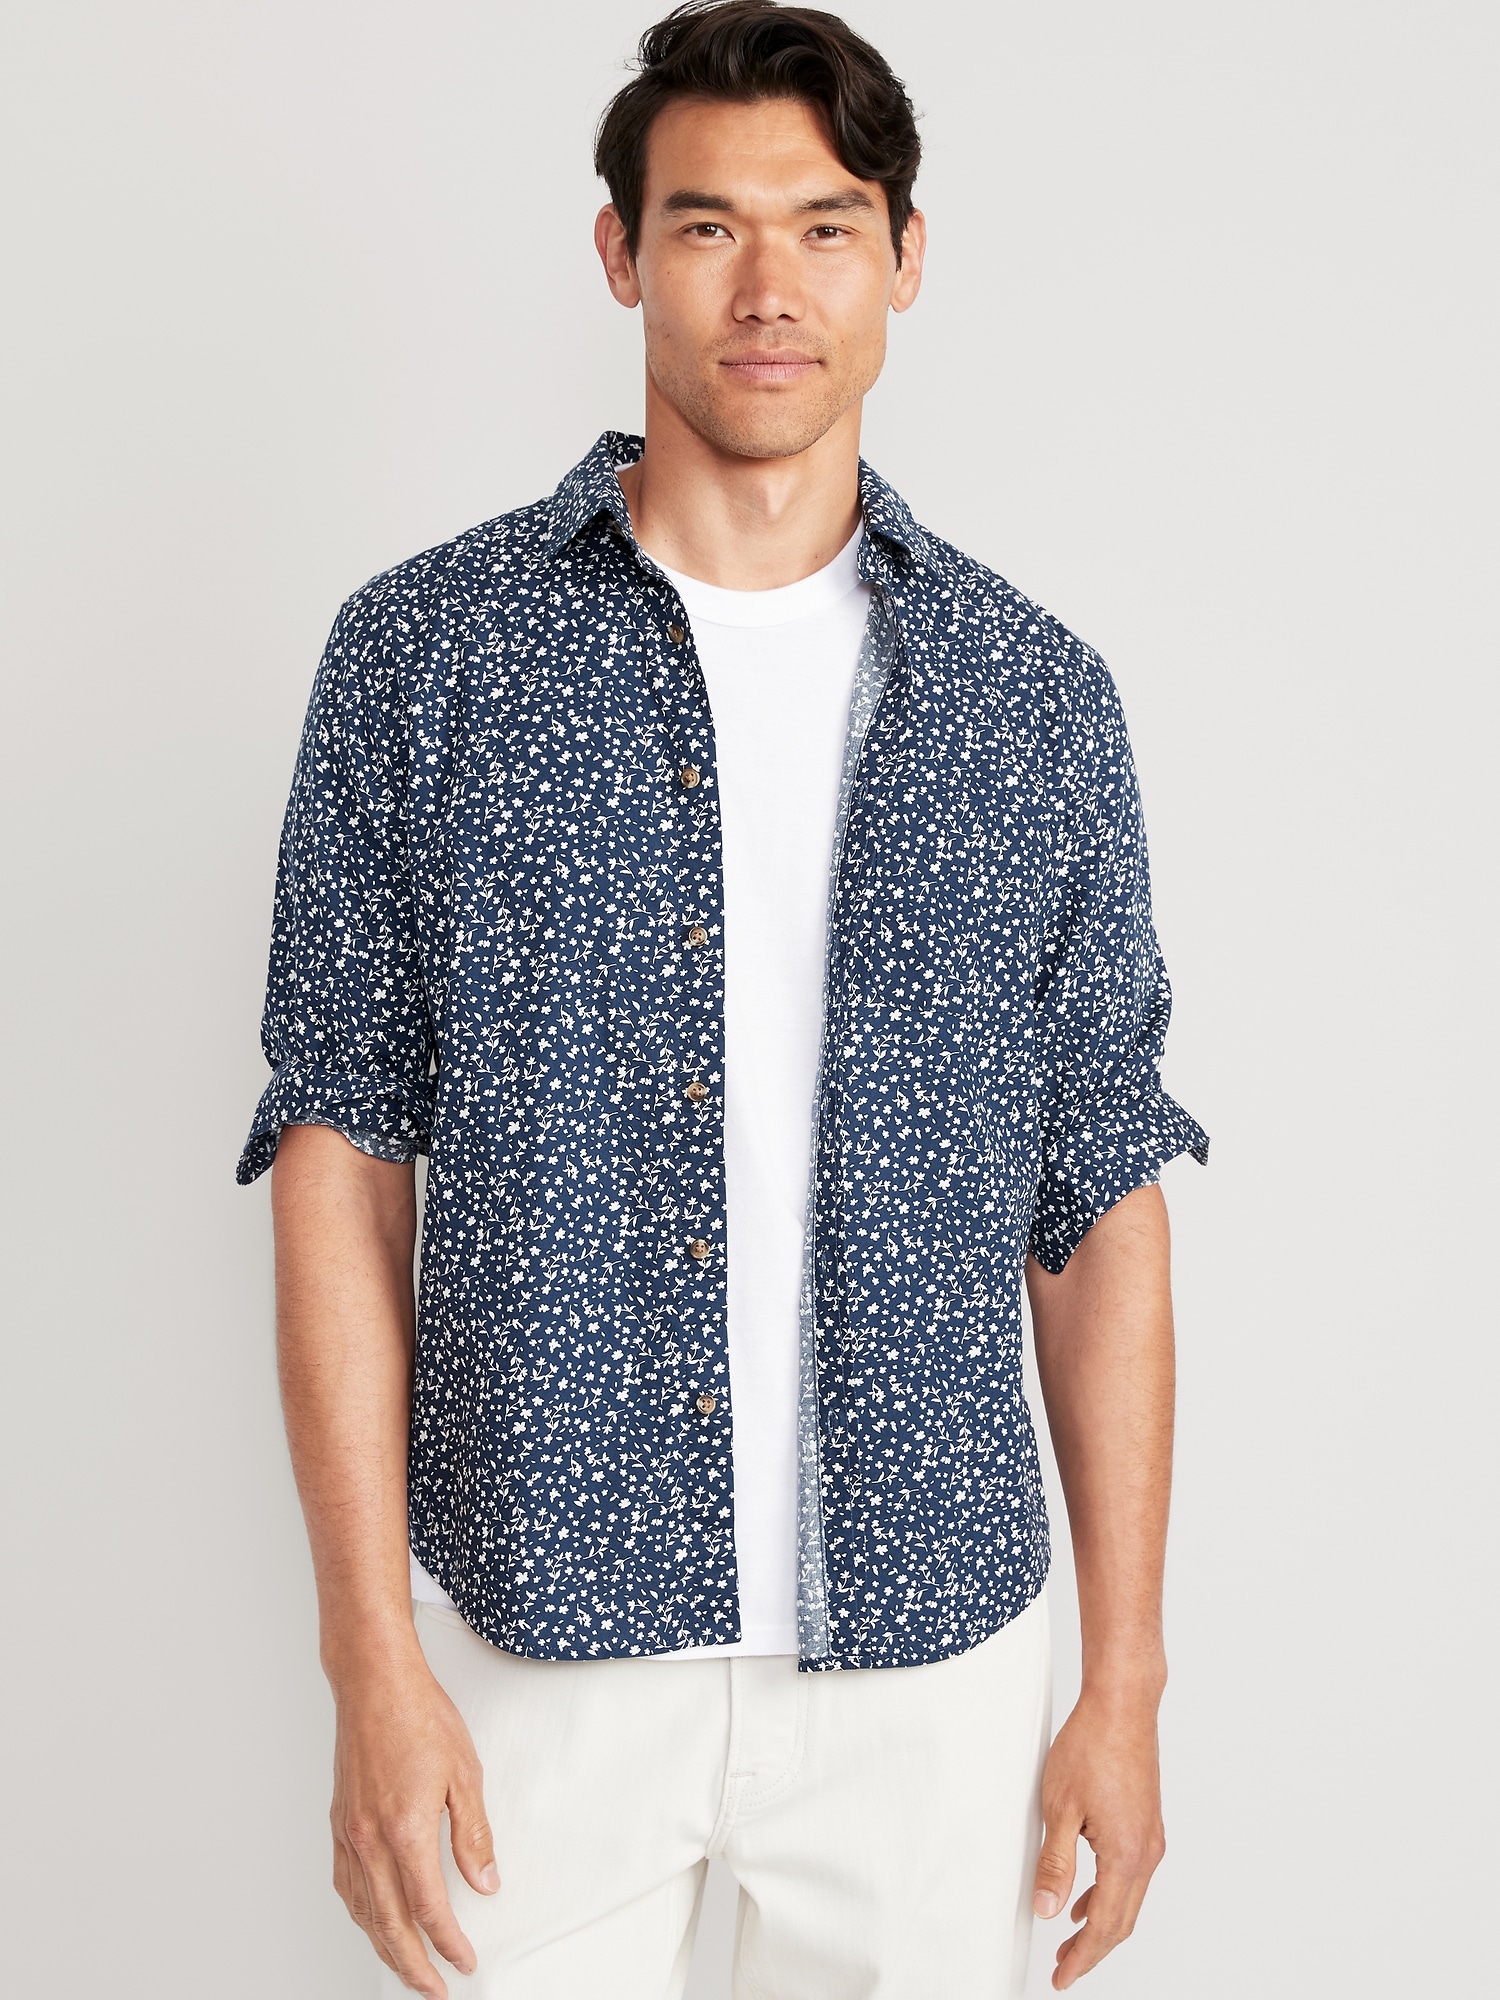 Off-White Linen Floral Print Men's Shirt , Relaxed Fit Floral